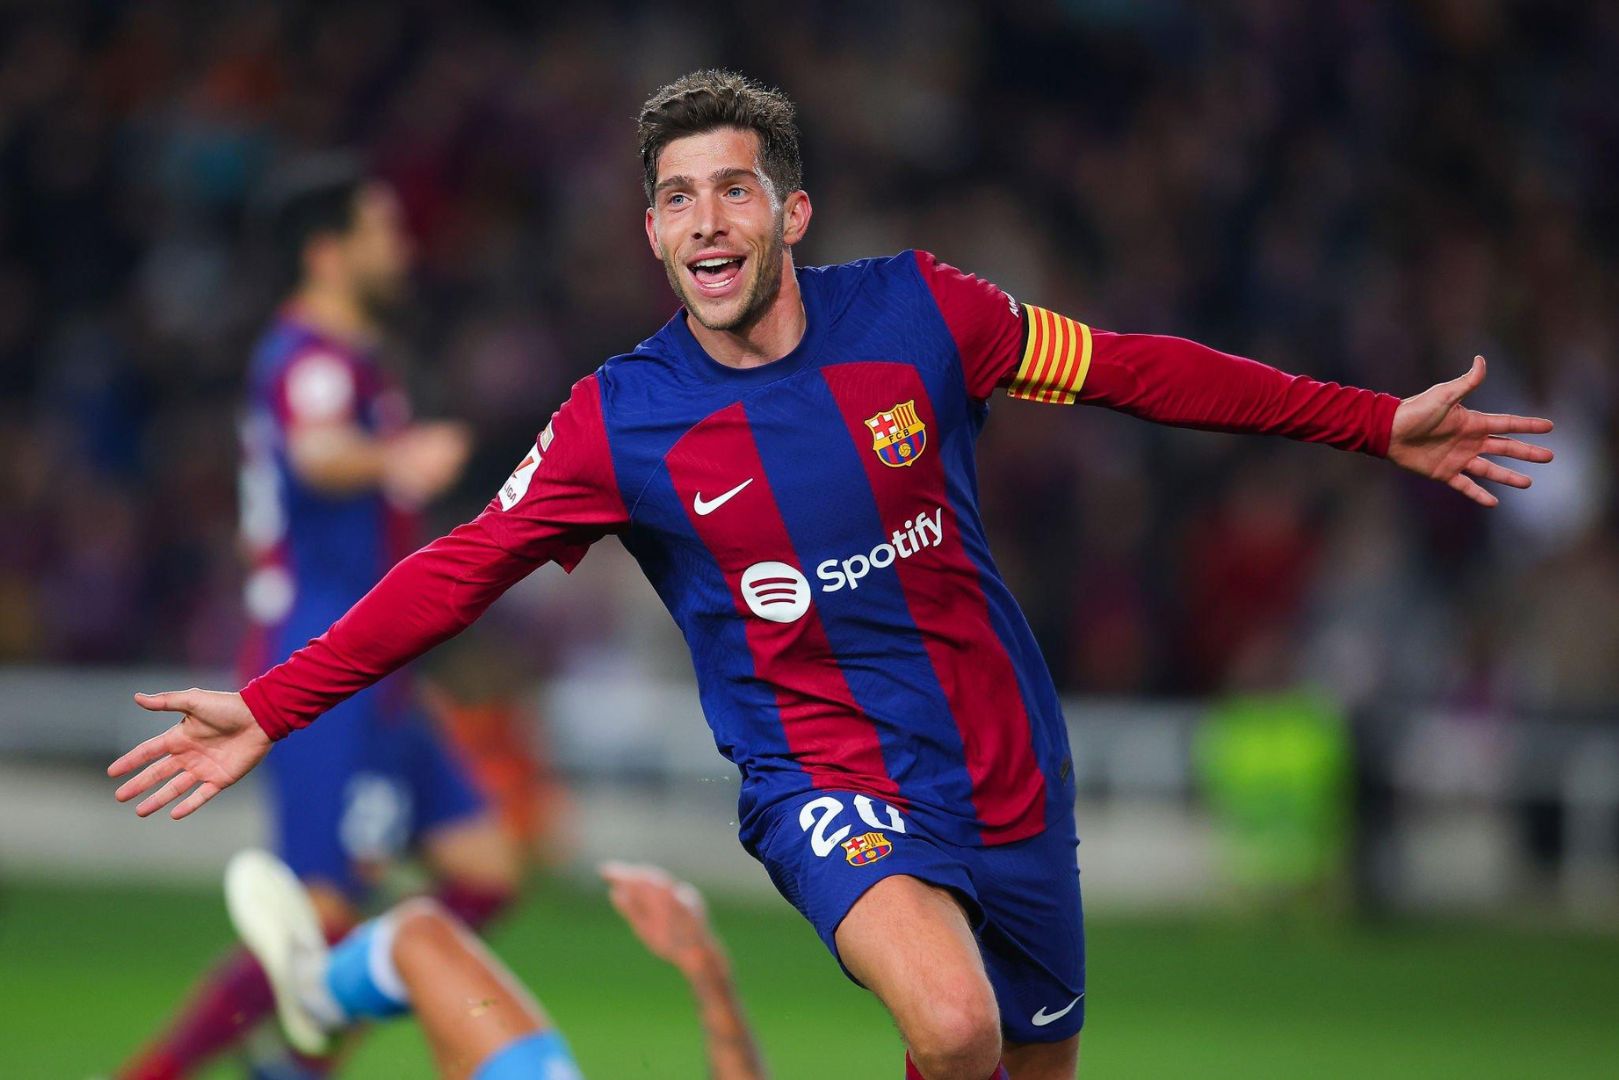 BARCELONA, SPAIN - DECEMBER 20: Sergi Roberto of FC Barcelona celebrates after scoring the team's third goal during the LaLiga EA Sports match between FC Barcelona and UD Almeria at Estadi Olimpic Lluis Companys on December 20, 2023 in Barcelona, Spain.